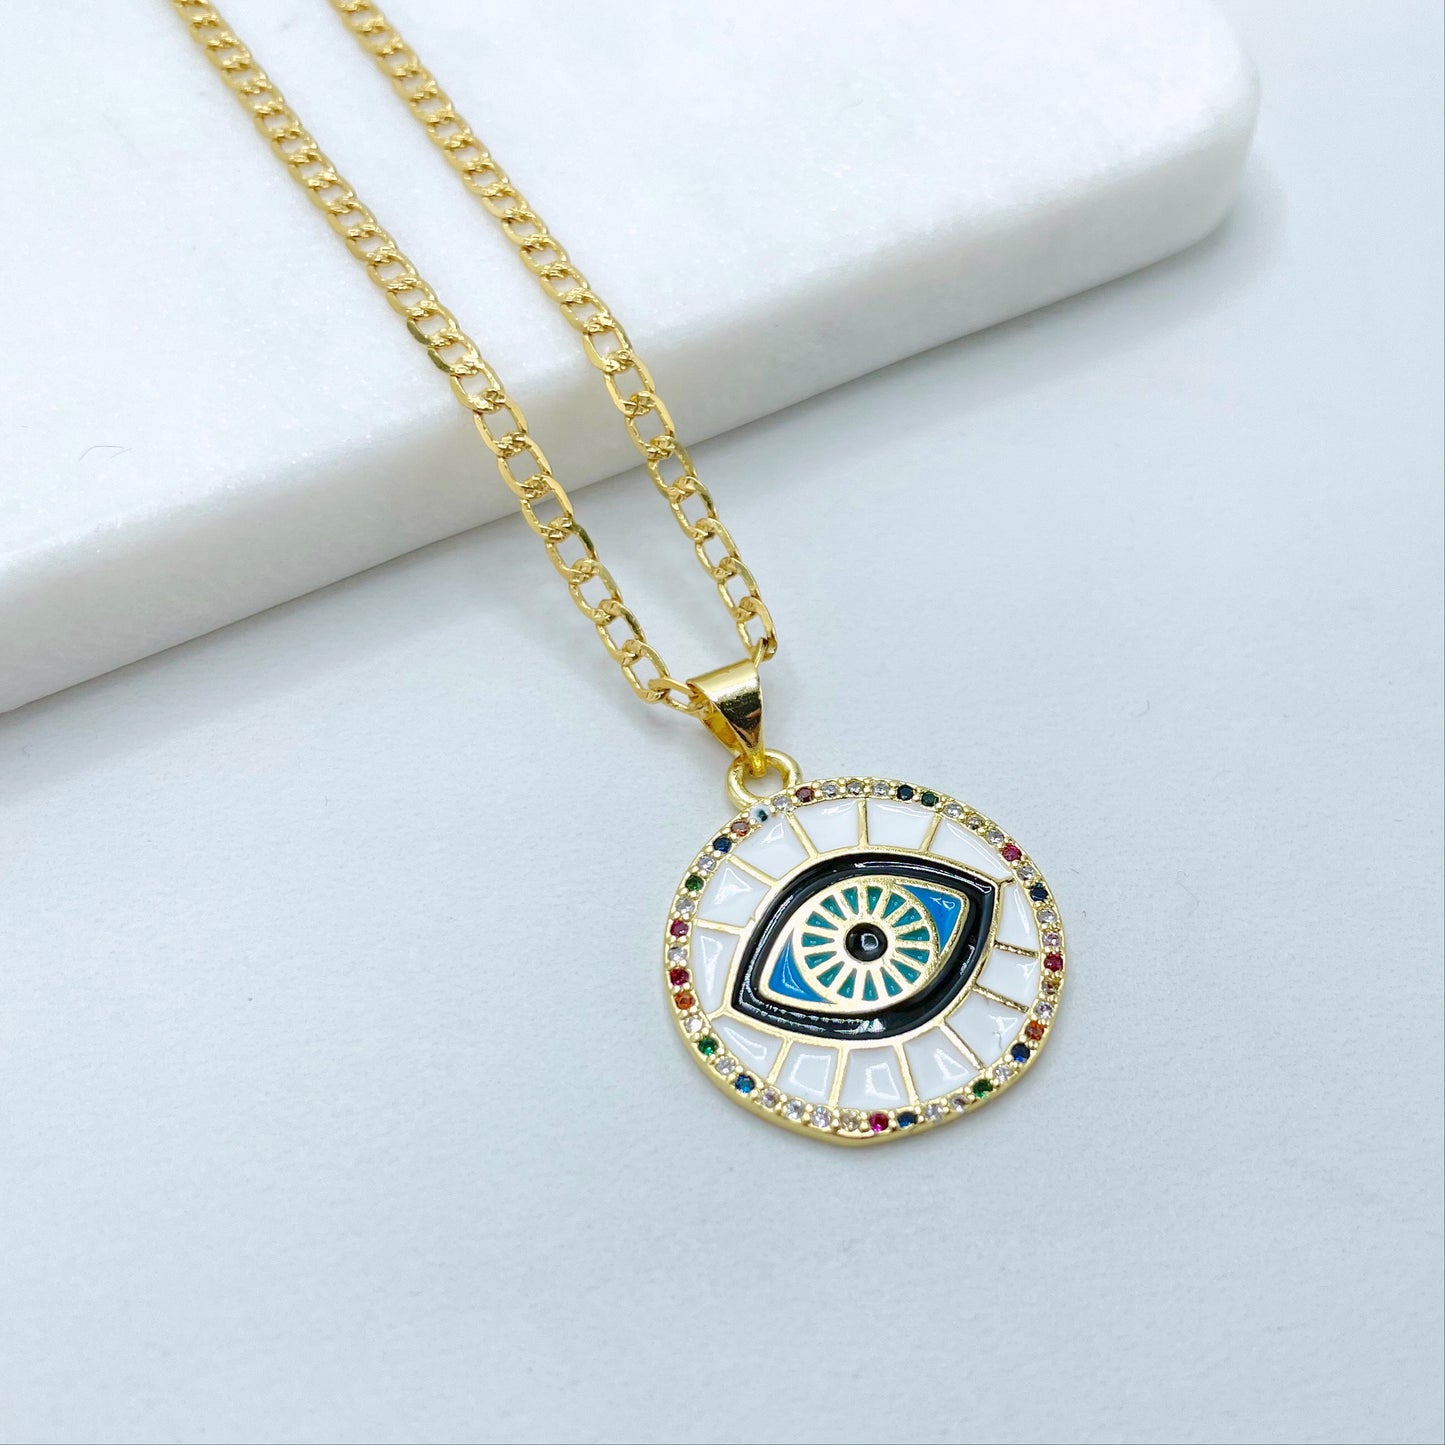 18k Gold Filled 2mm Curb Link Chain, White Enamel with Colored Micro CZ Evil Eyes Round Shape Earrings and Charm, Wholesale Jewelry Supplies